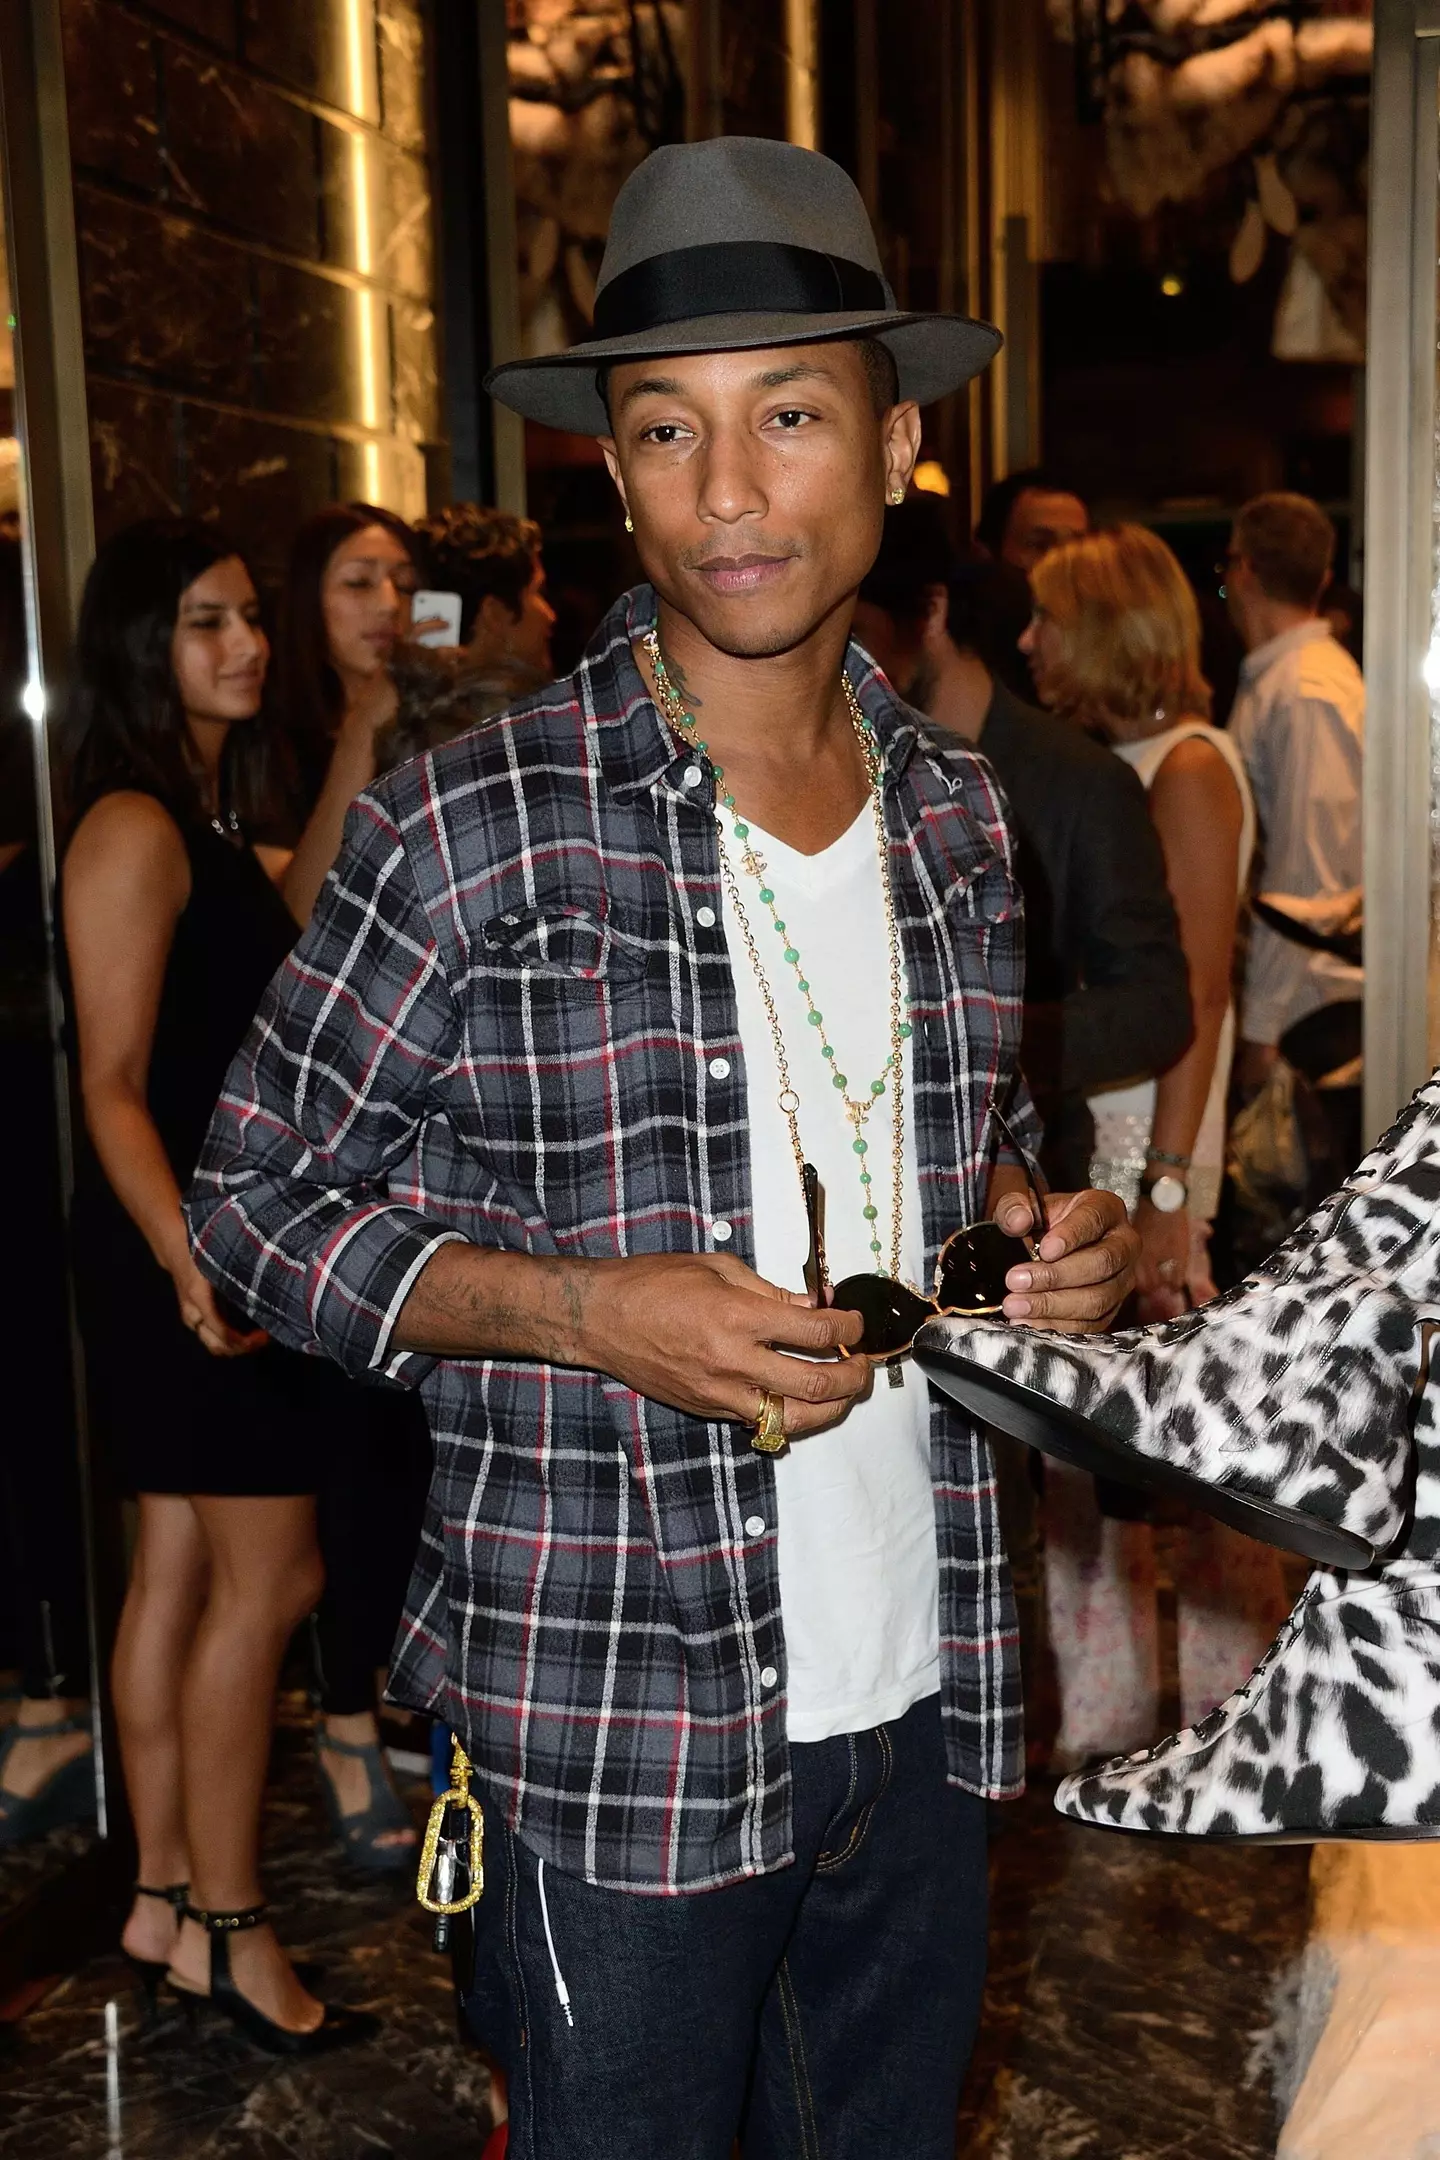 Pharrell Williams just doesn't seem to age.